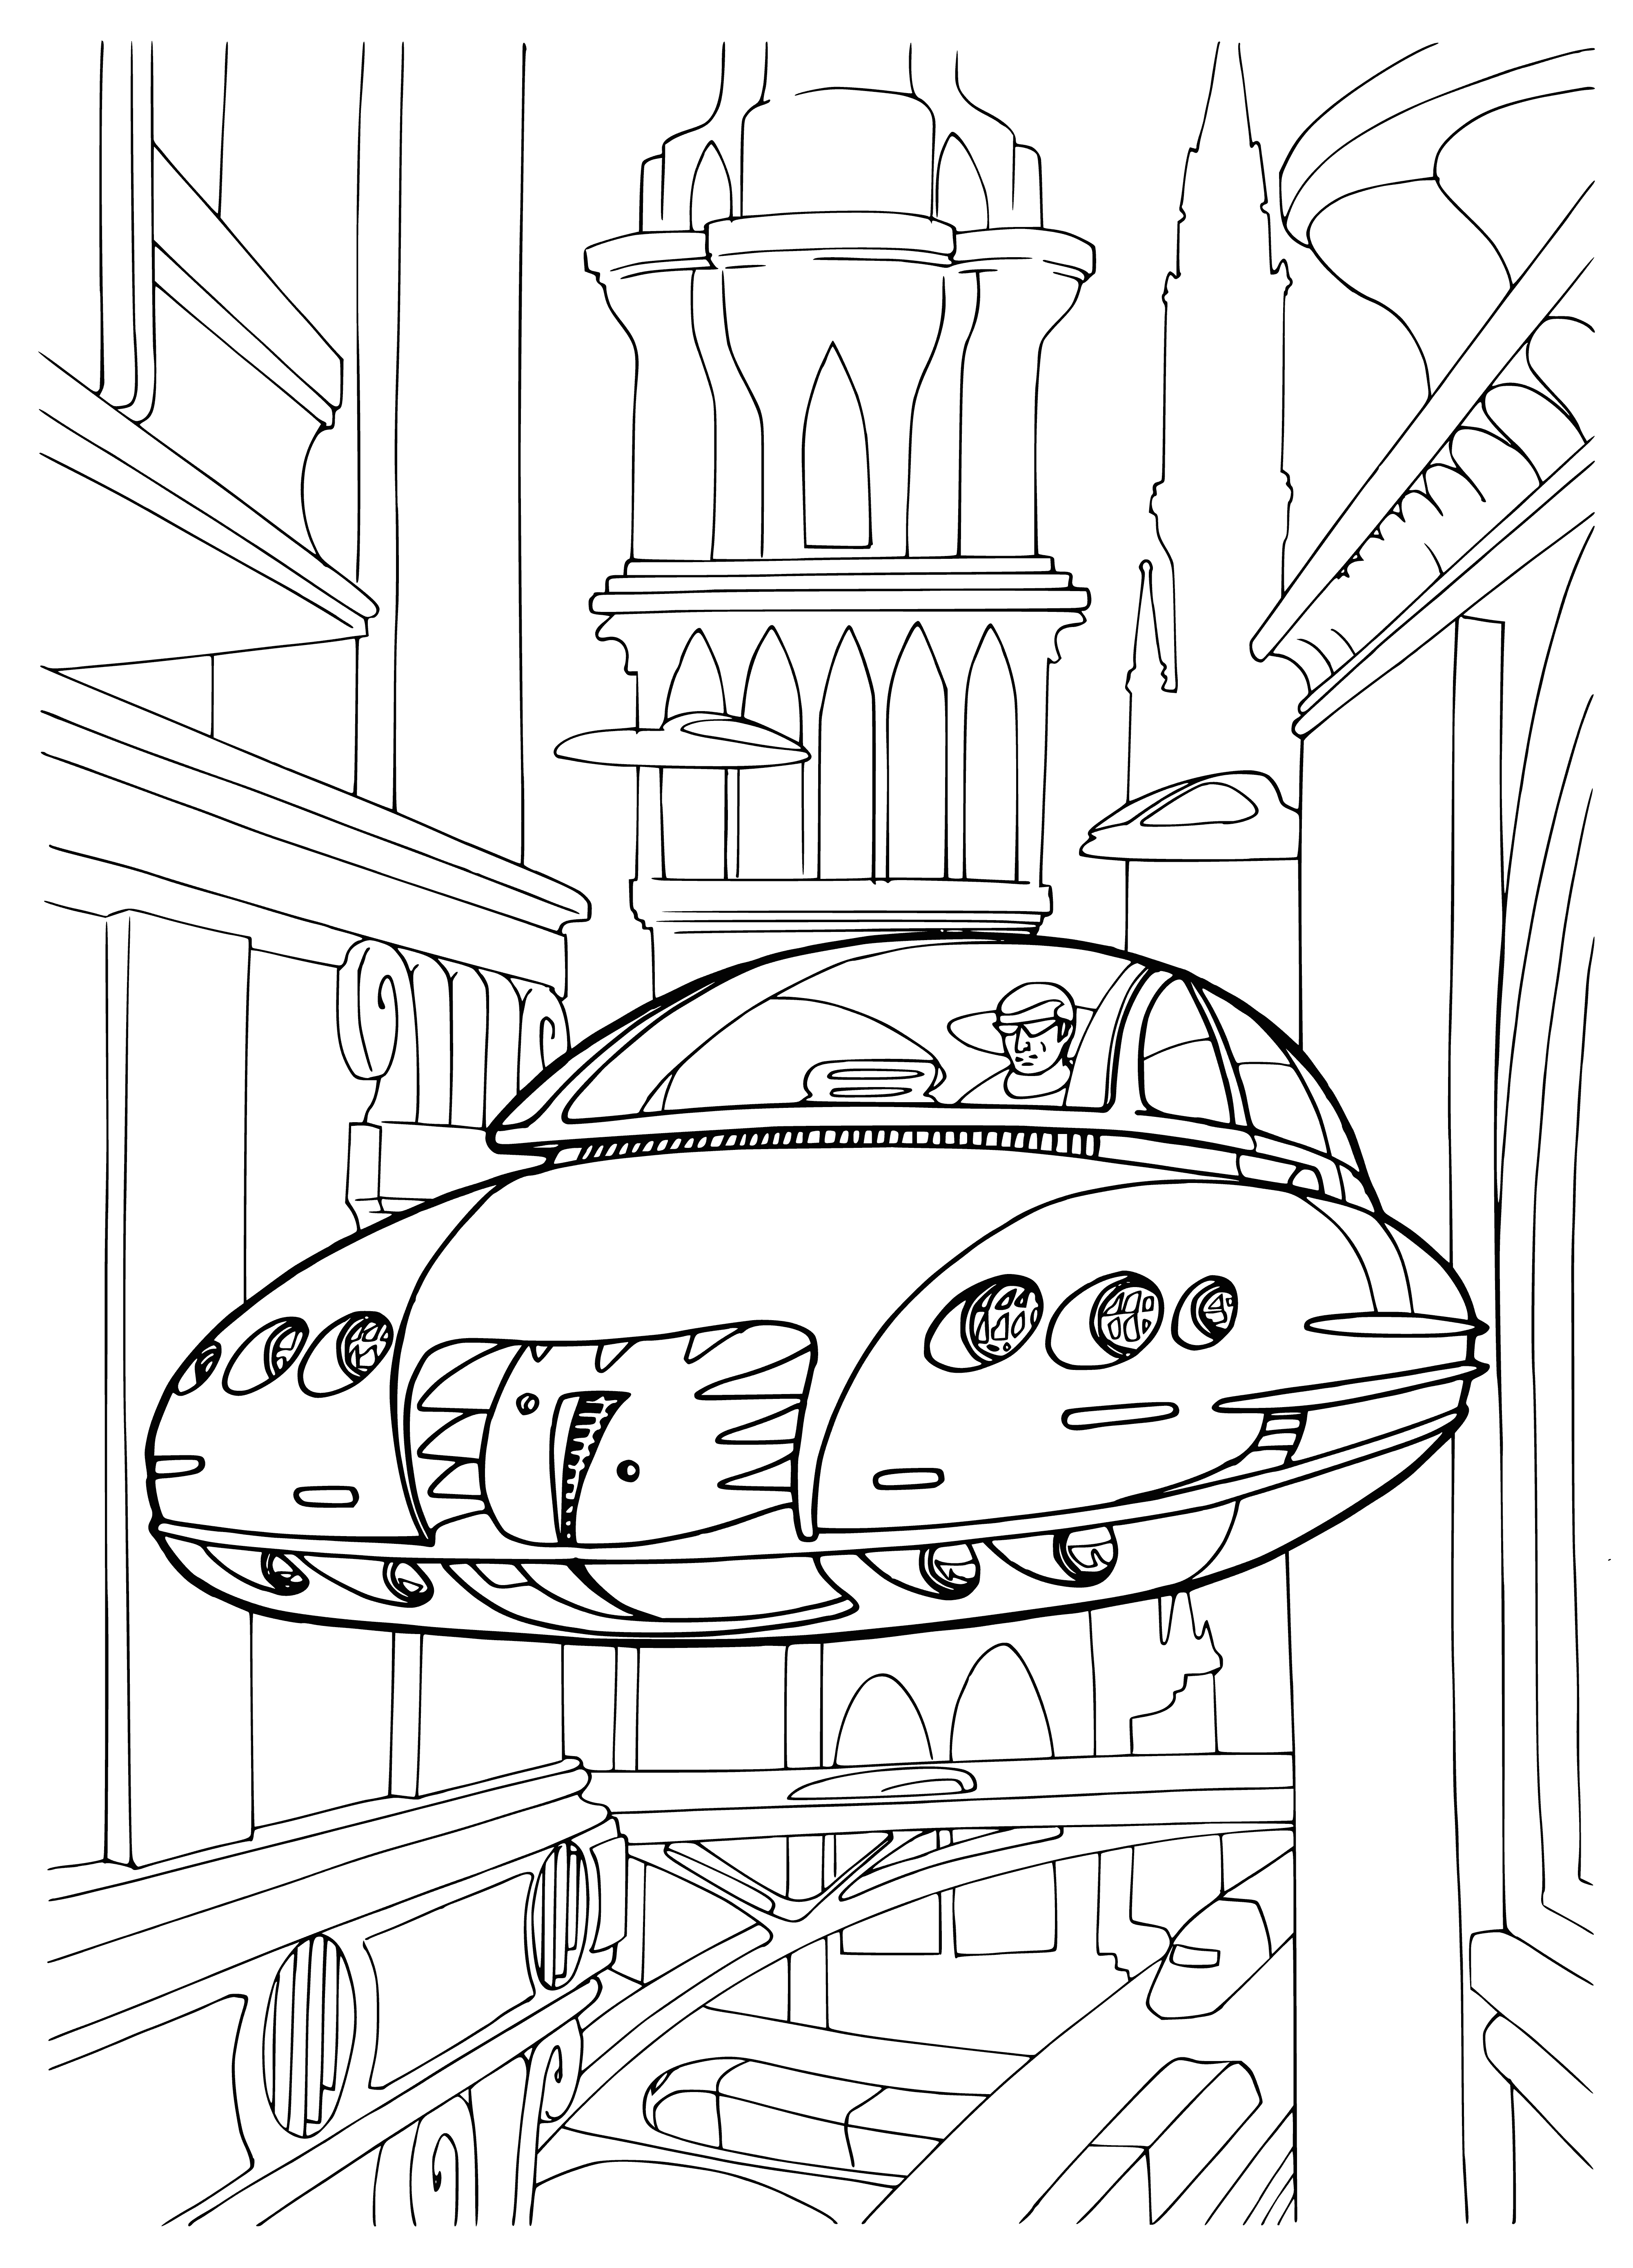 Antigravity coloring page